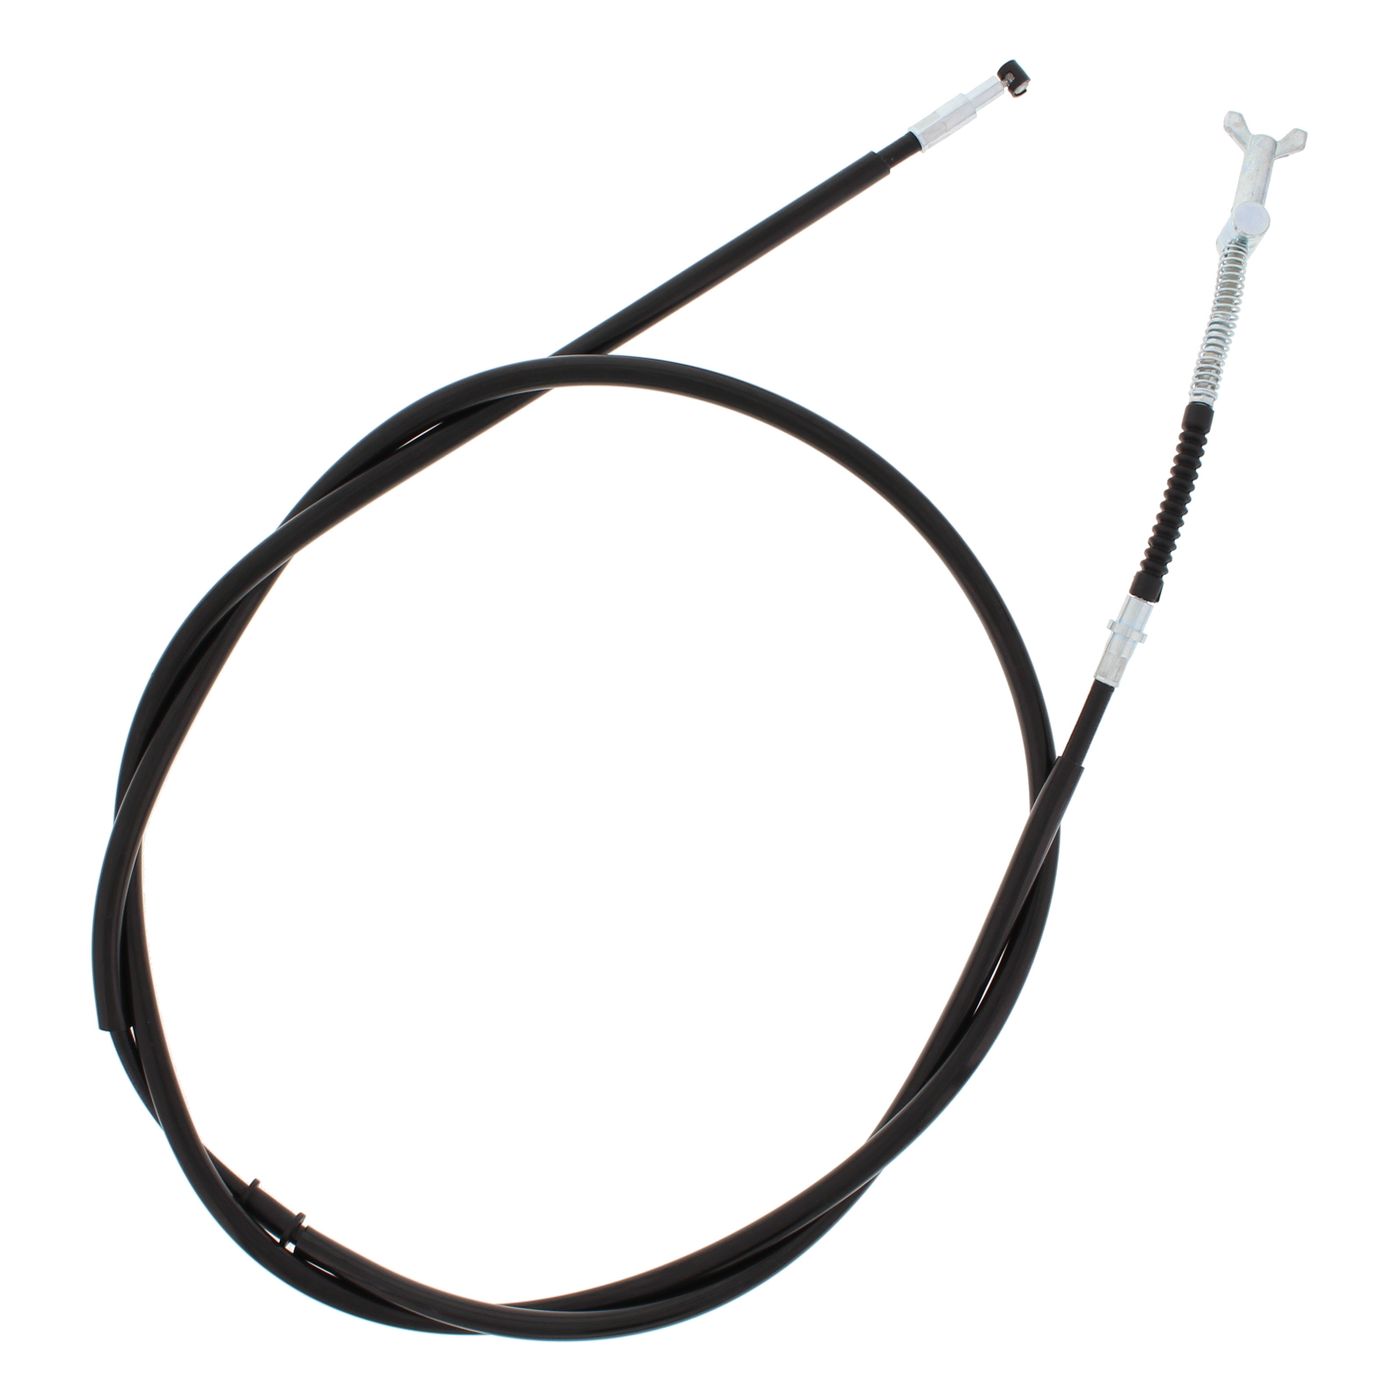 Wrp Brake Cables - WRP454012 image